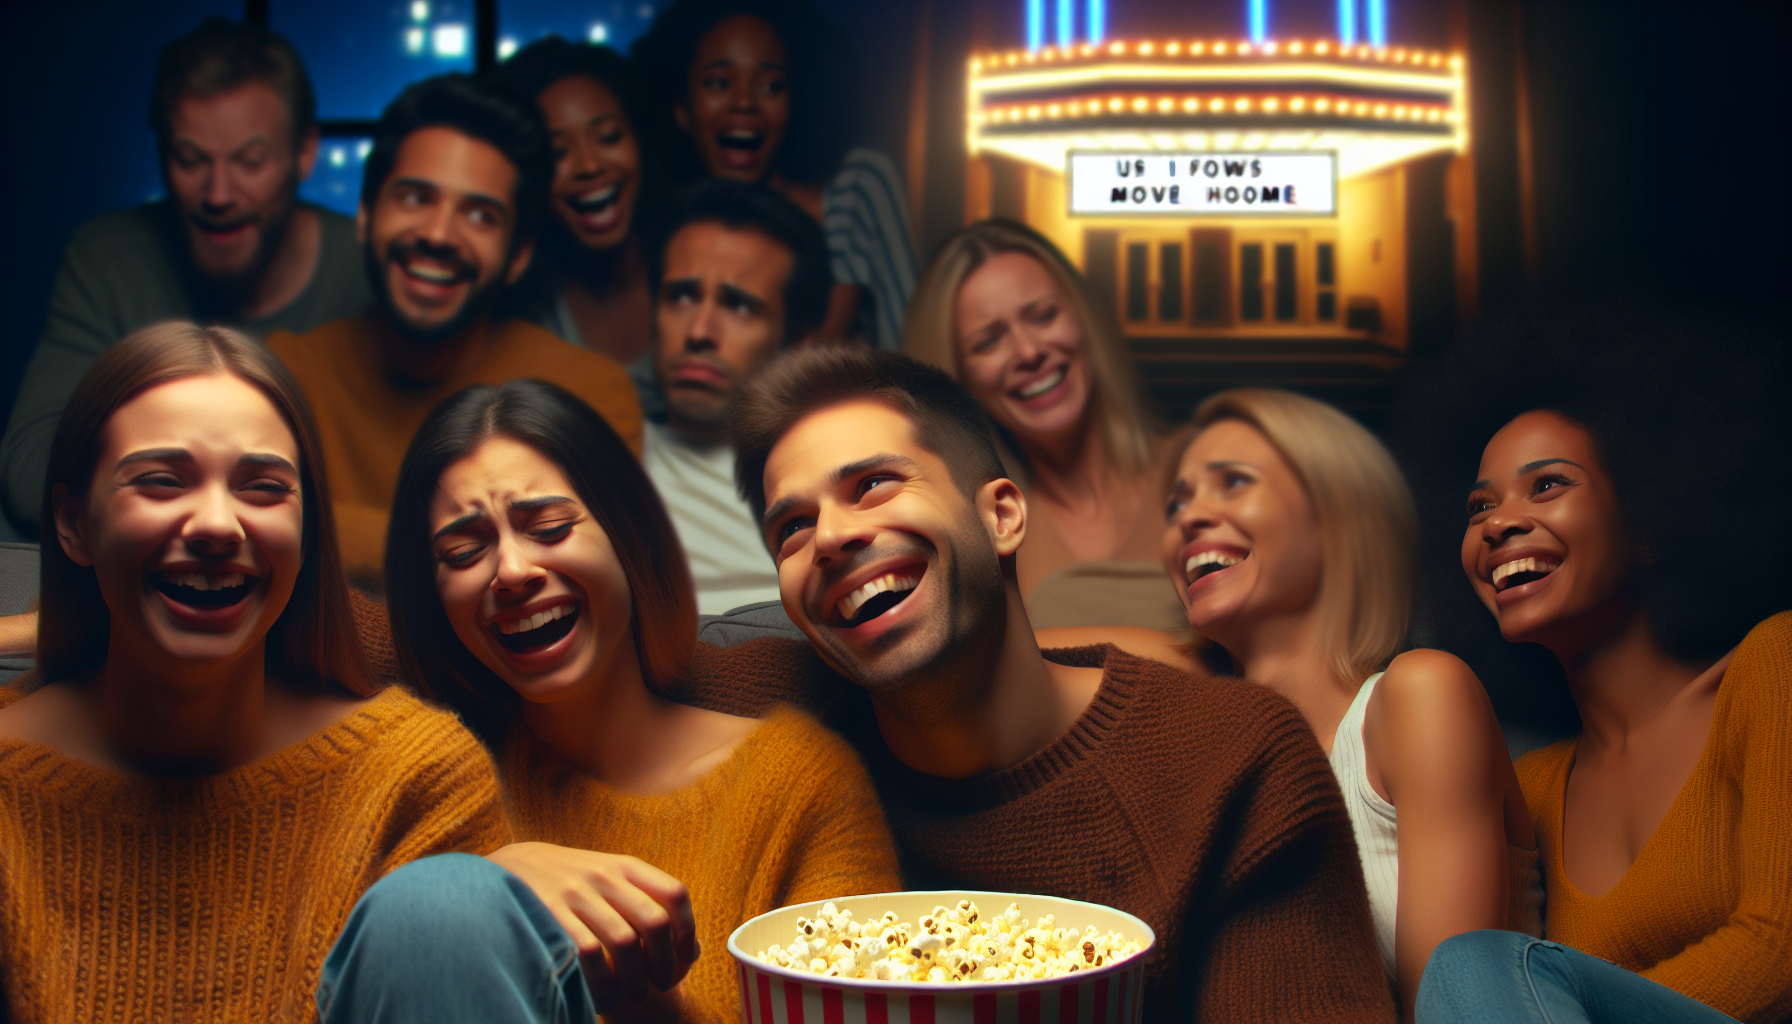 discover if netflix's new popcorn line will be the ultimate threat to amc with this in-depth analysis. find out how this new initiative could revolutionize the movie experience.